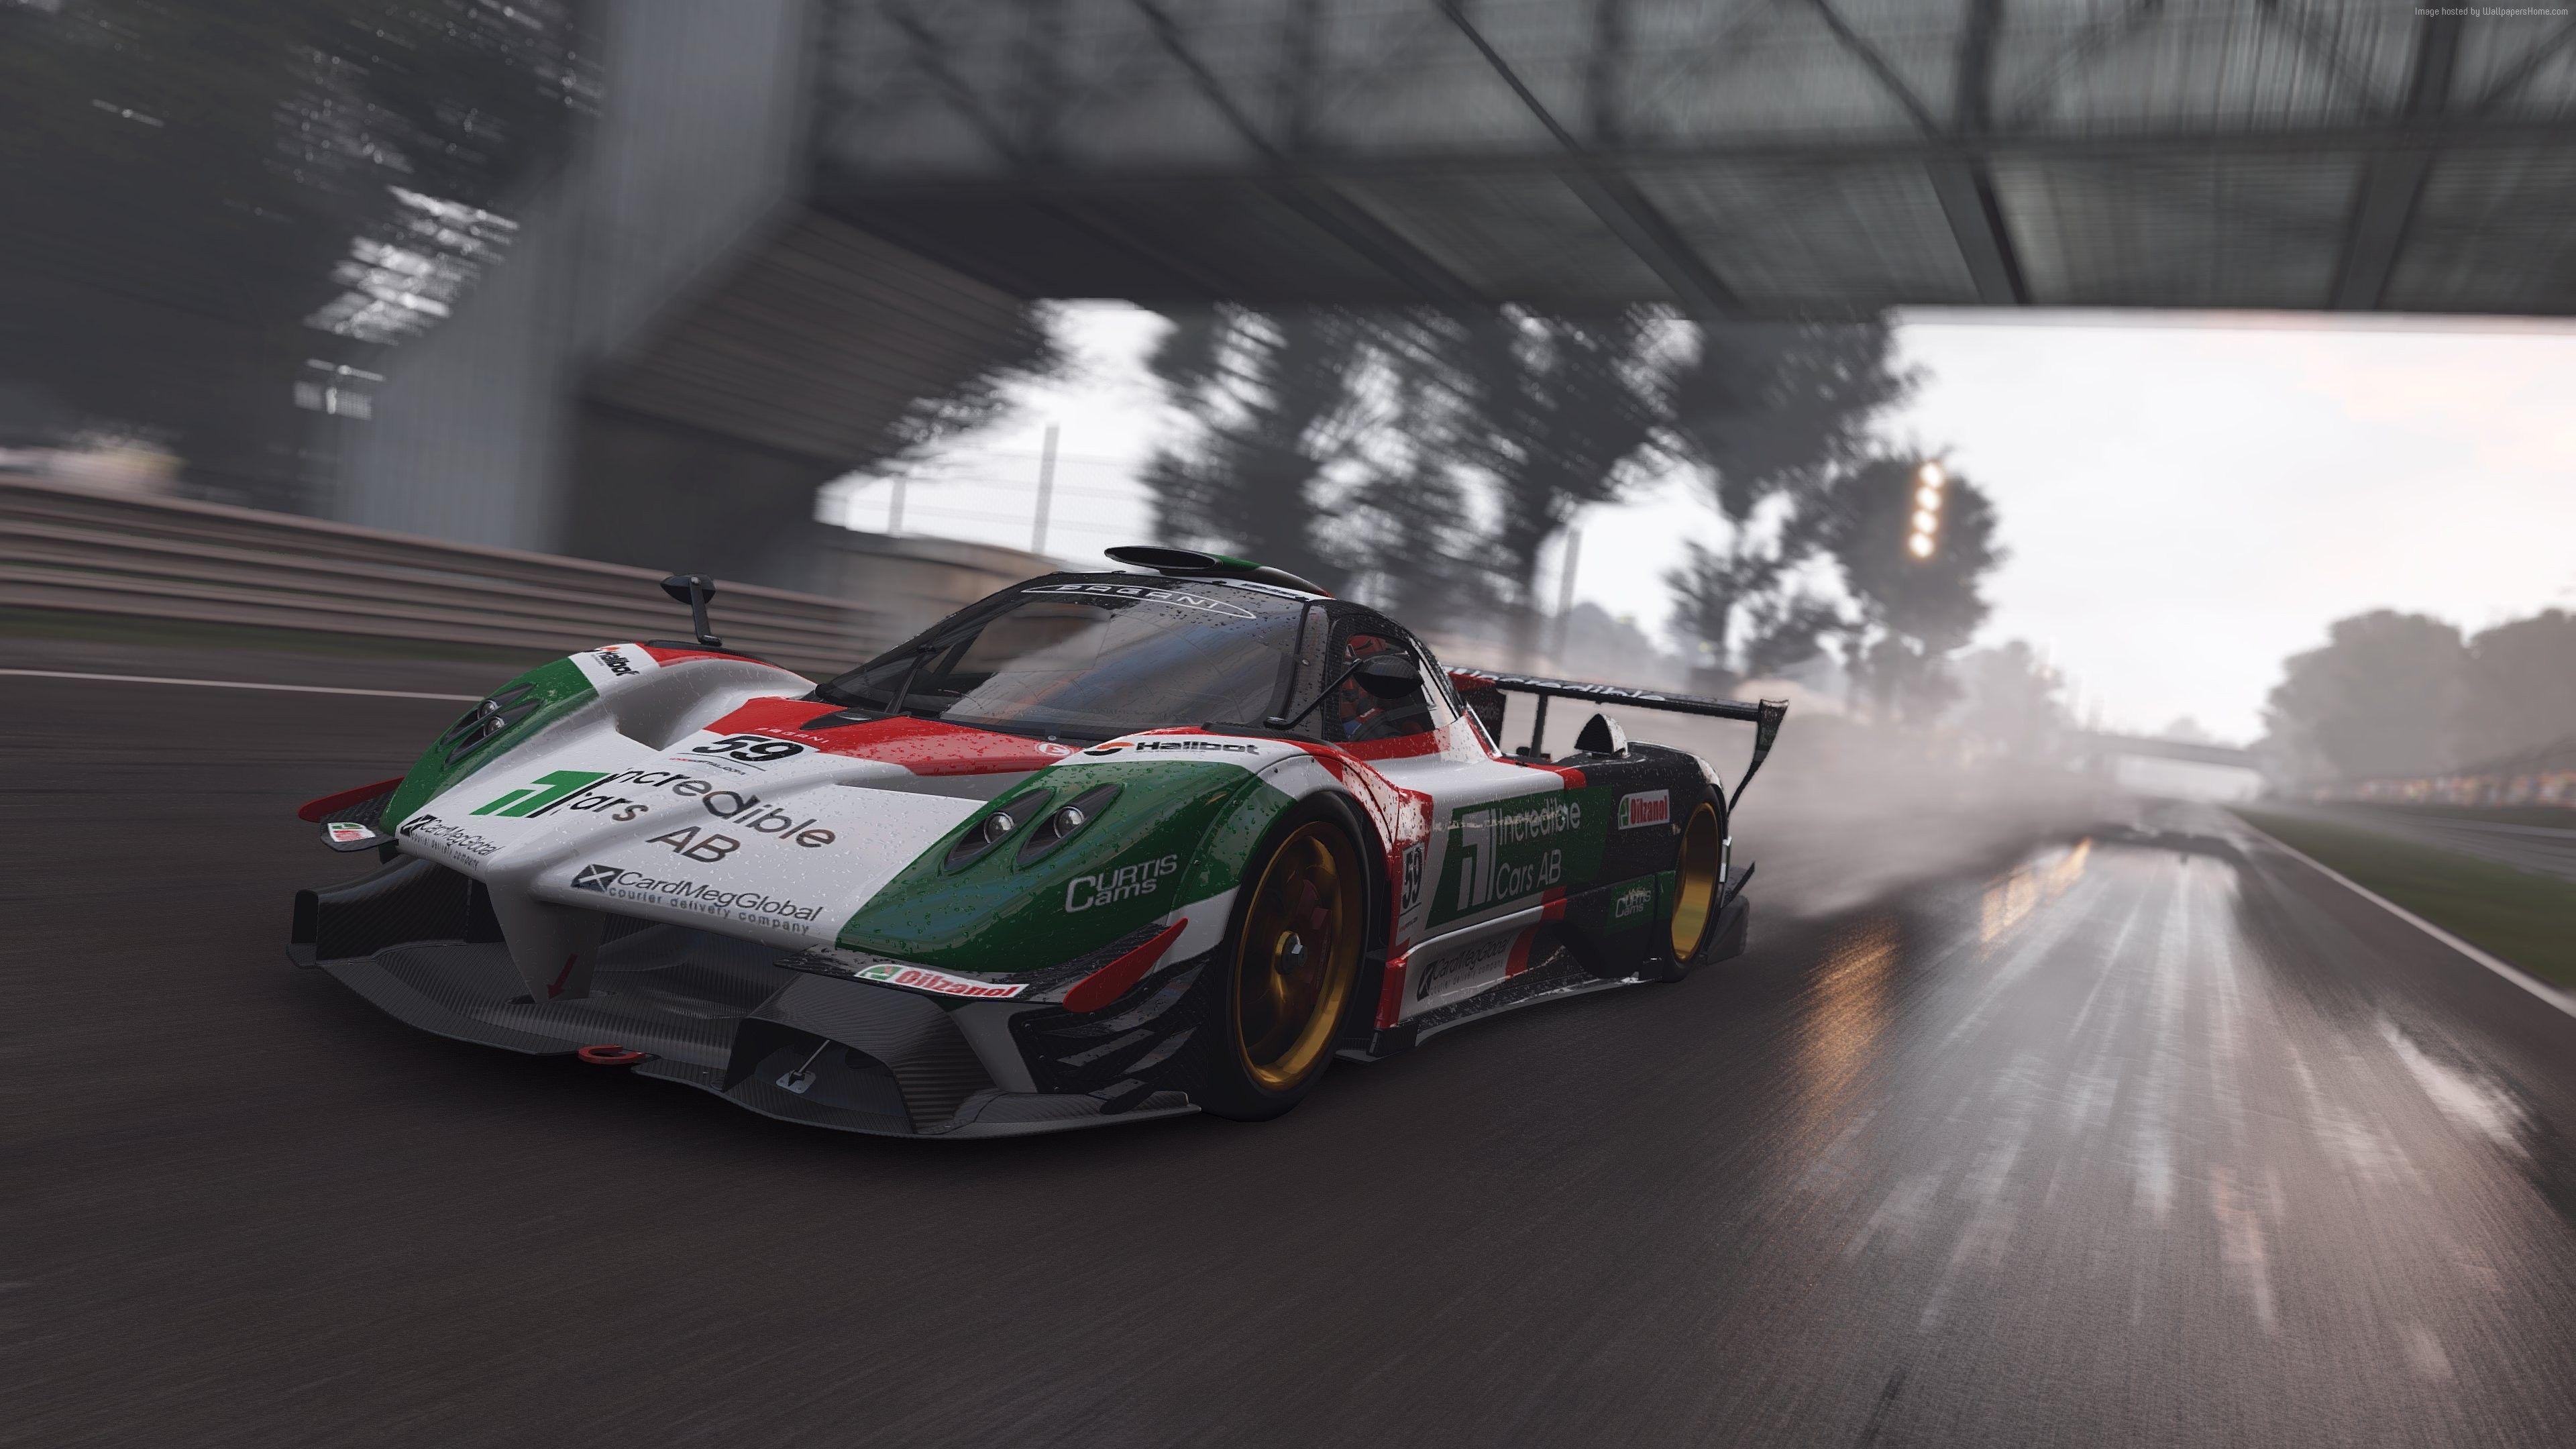 Awesome Project Cars 2 Wallpaper Gallery Wallpaper Free 2018